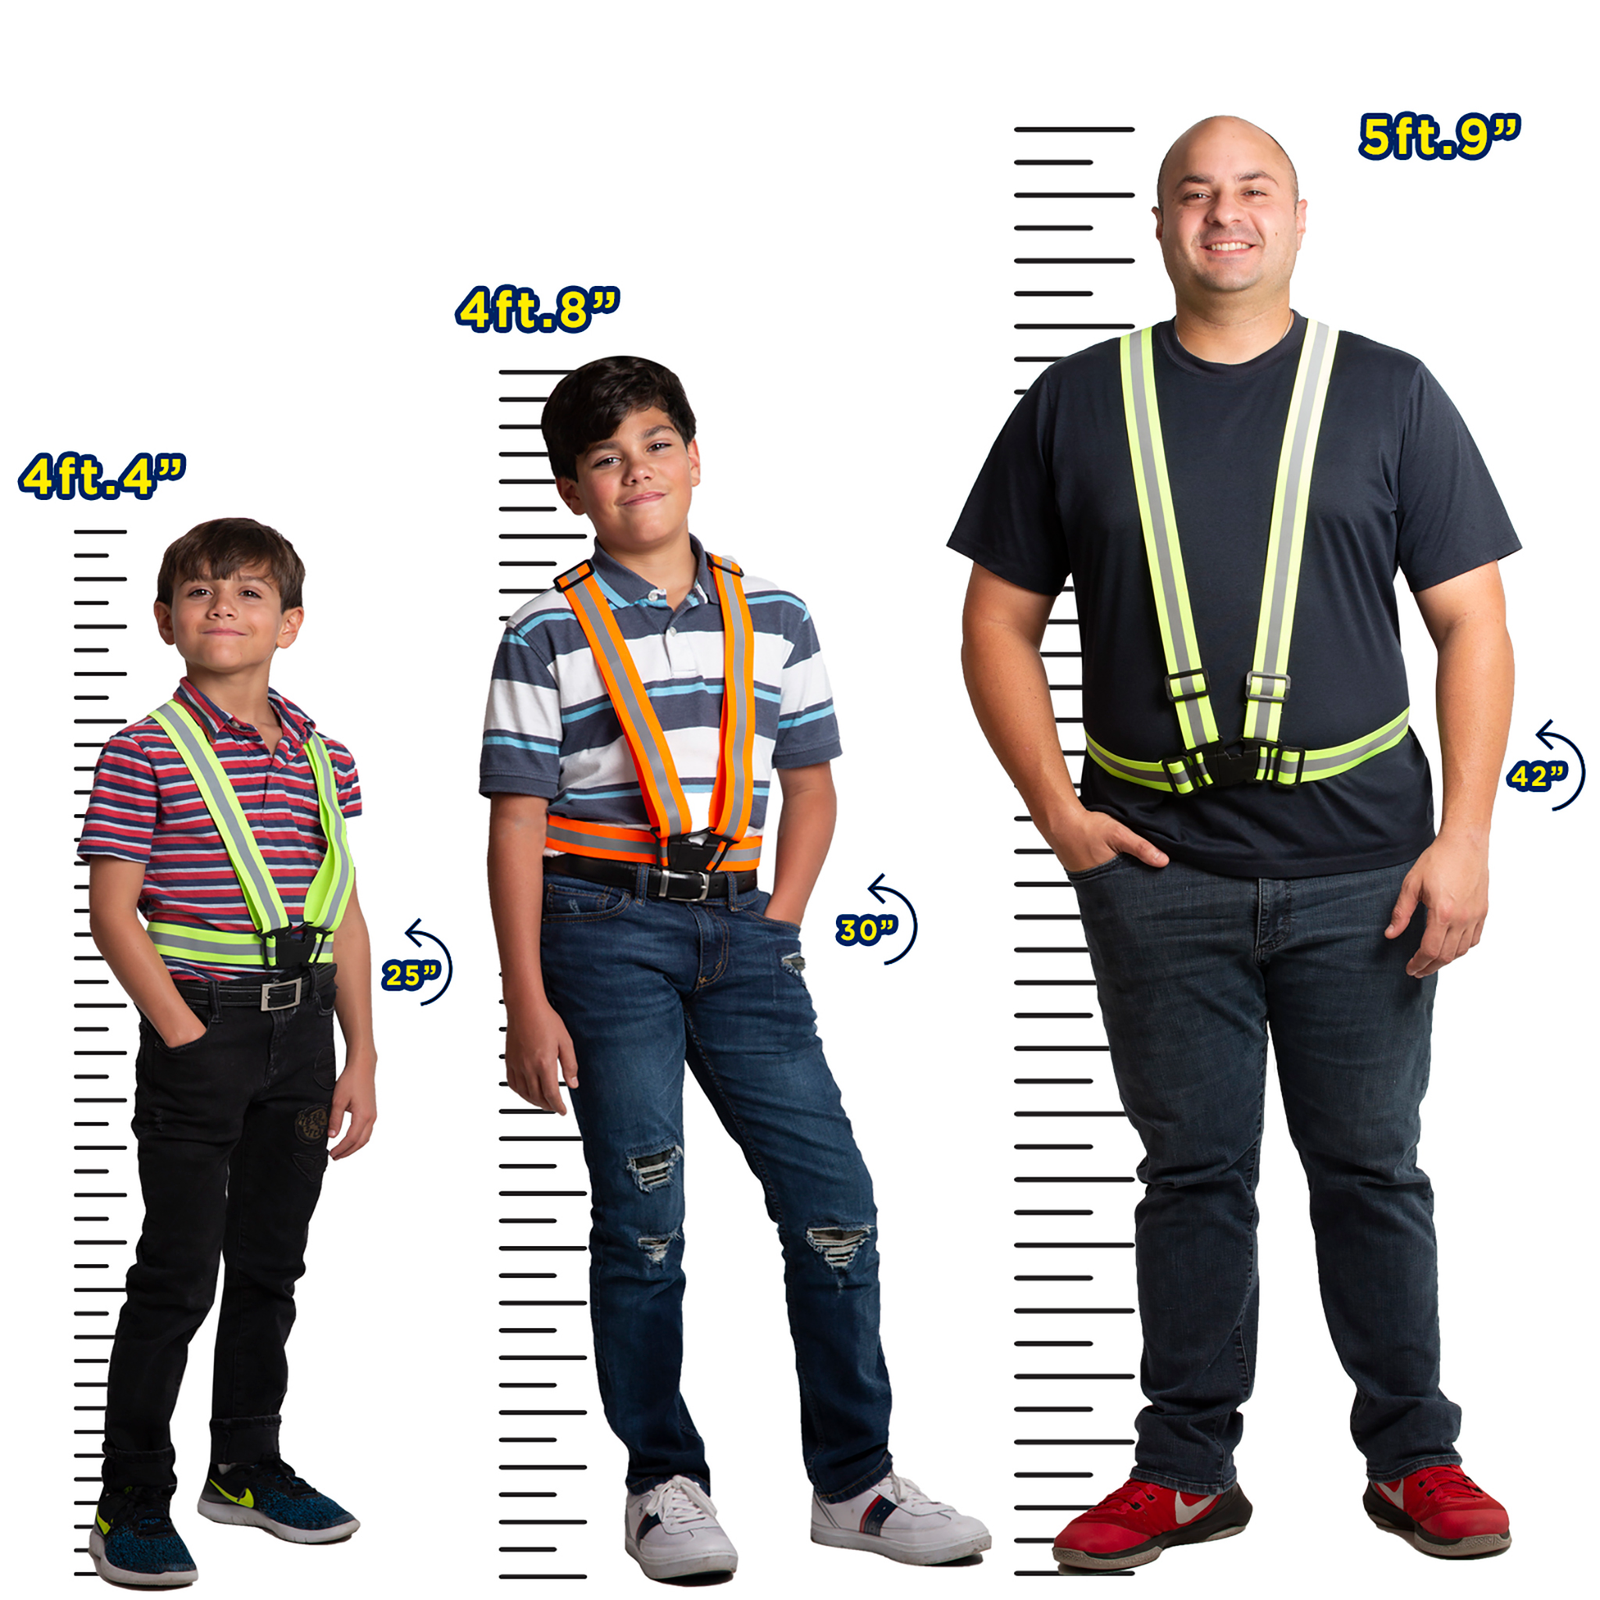 Features how size adaptable this suspendes can be by showing a man a young boy and a kid wearing the same reflective safety suspender. 